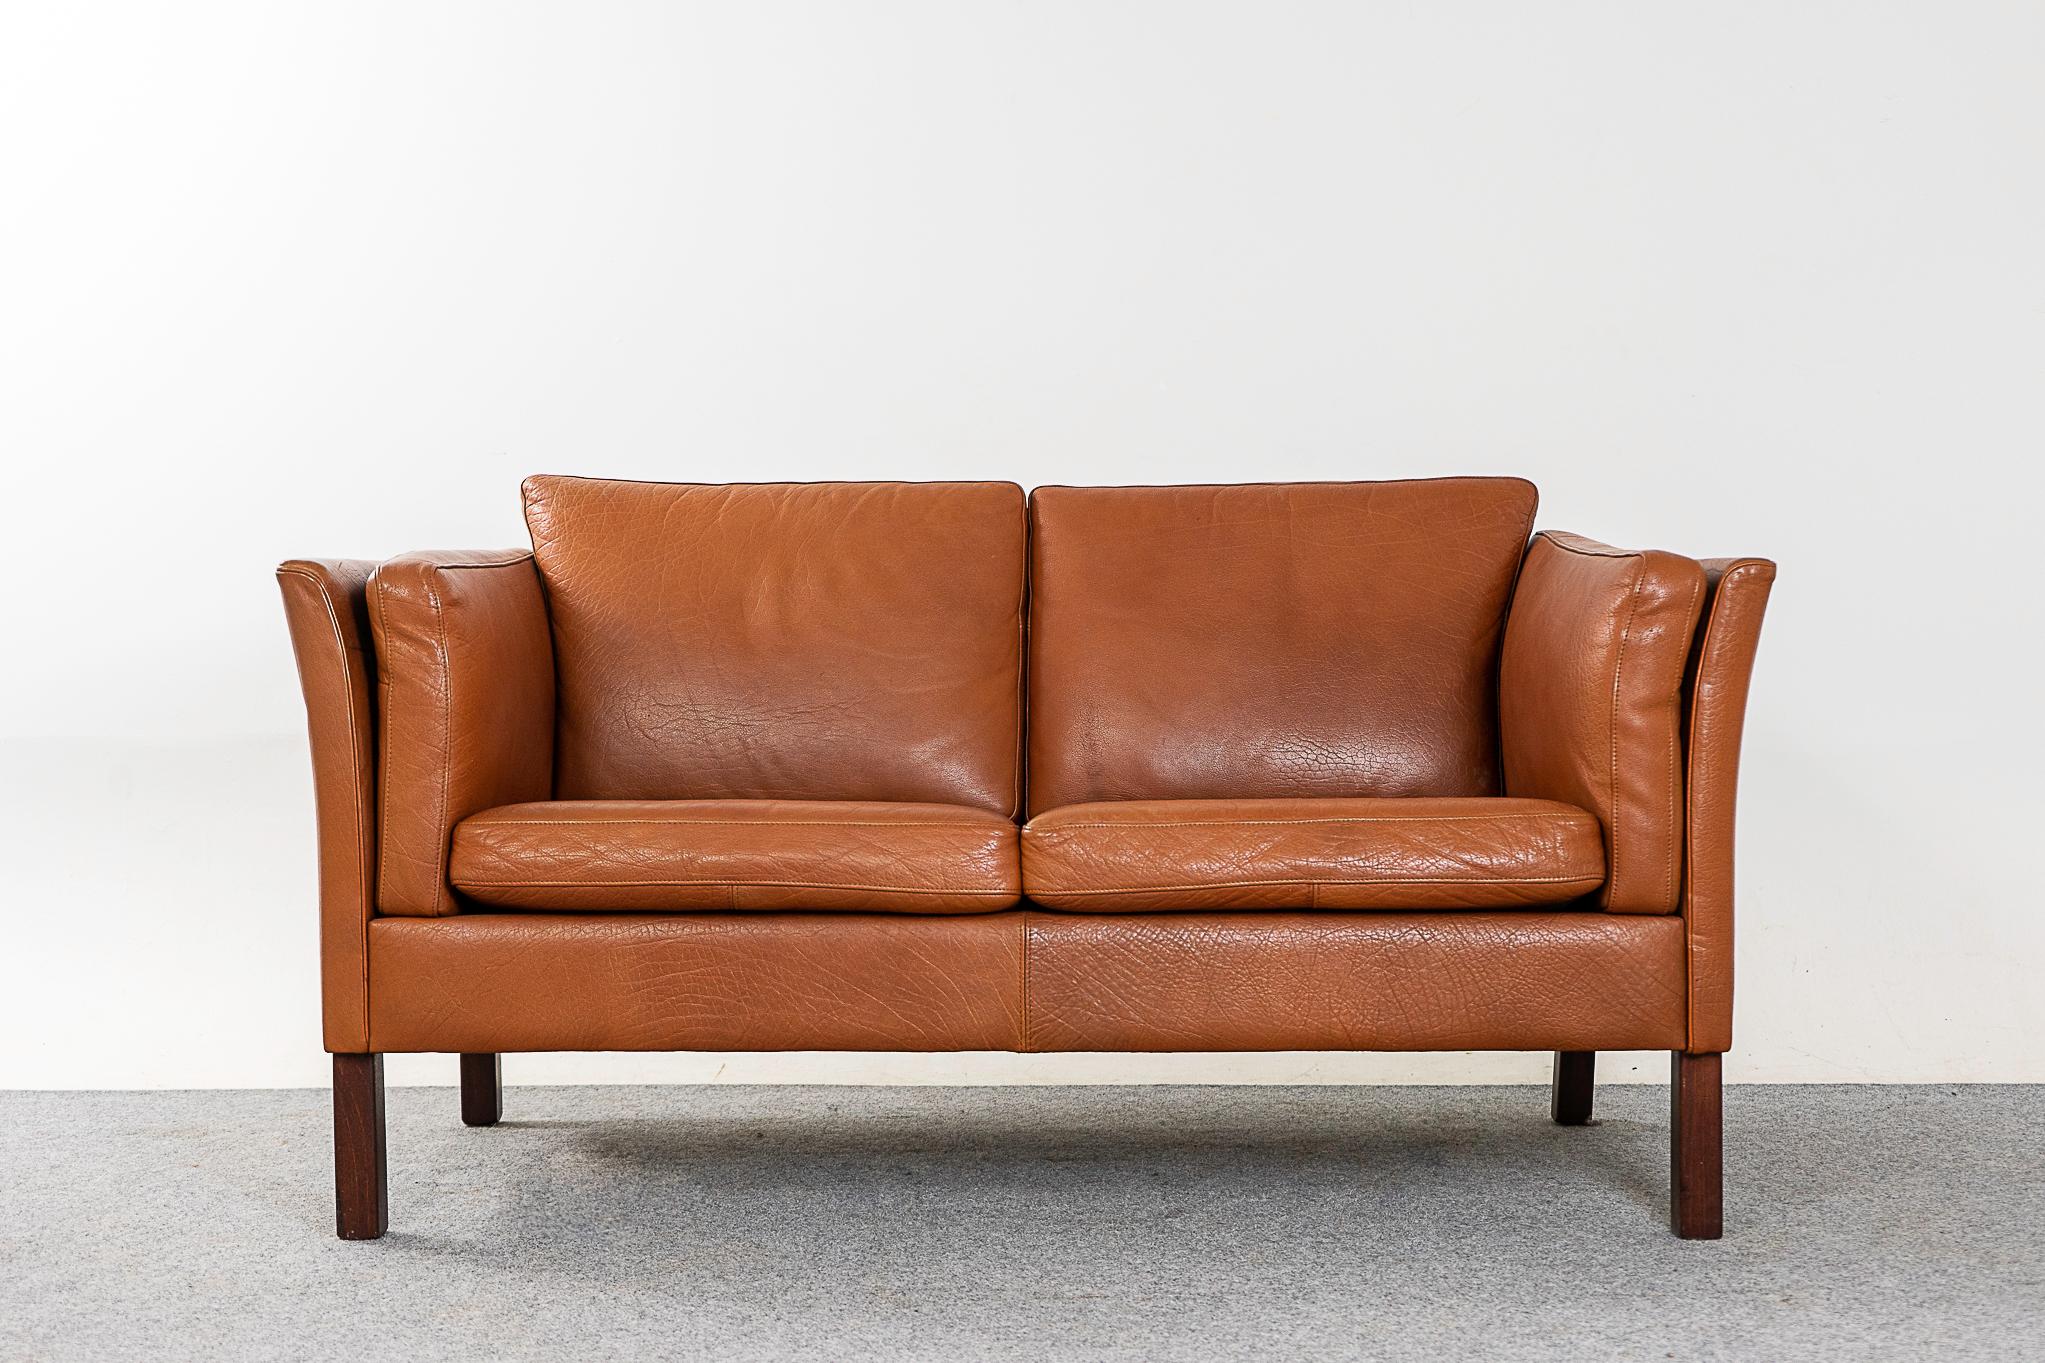 Leather Danish loveseat, circa 1960s. Soft, supple vintage butterscotch leather is still durable enough to ensure years of use and enjoyment. Compact footprint, a 
perfect seating solution for urban dwellers. 

Please inquire for international